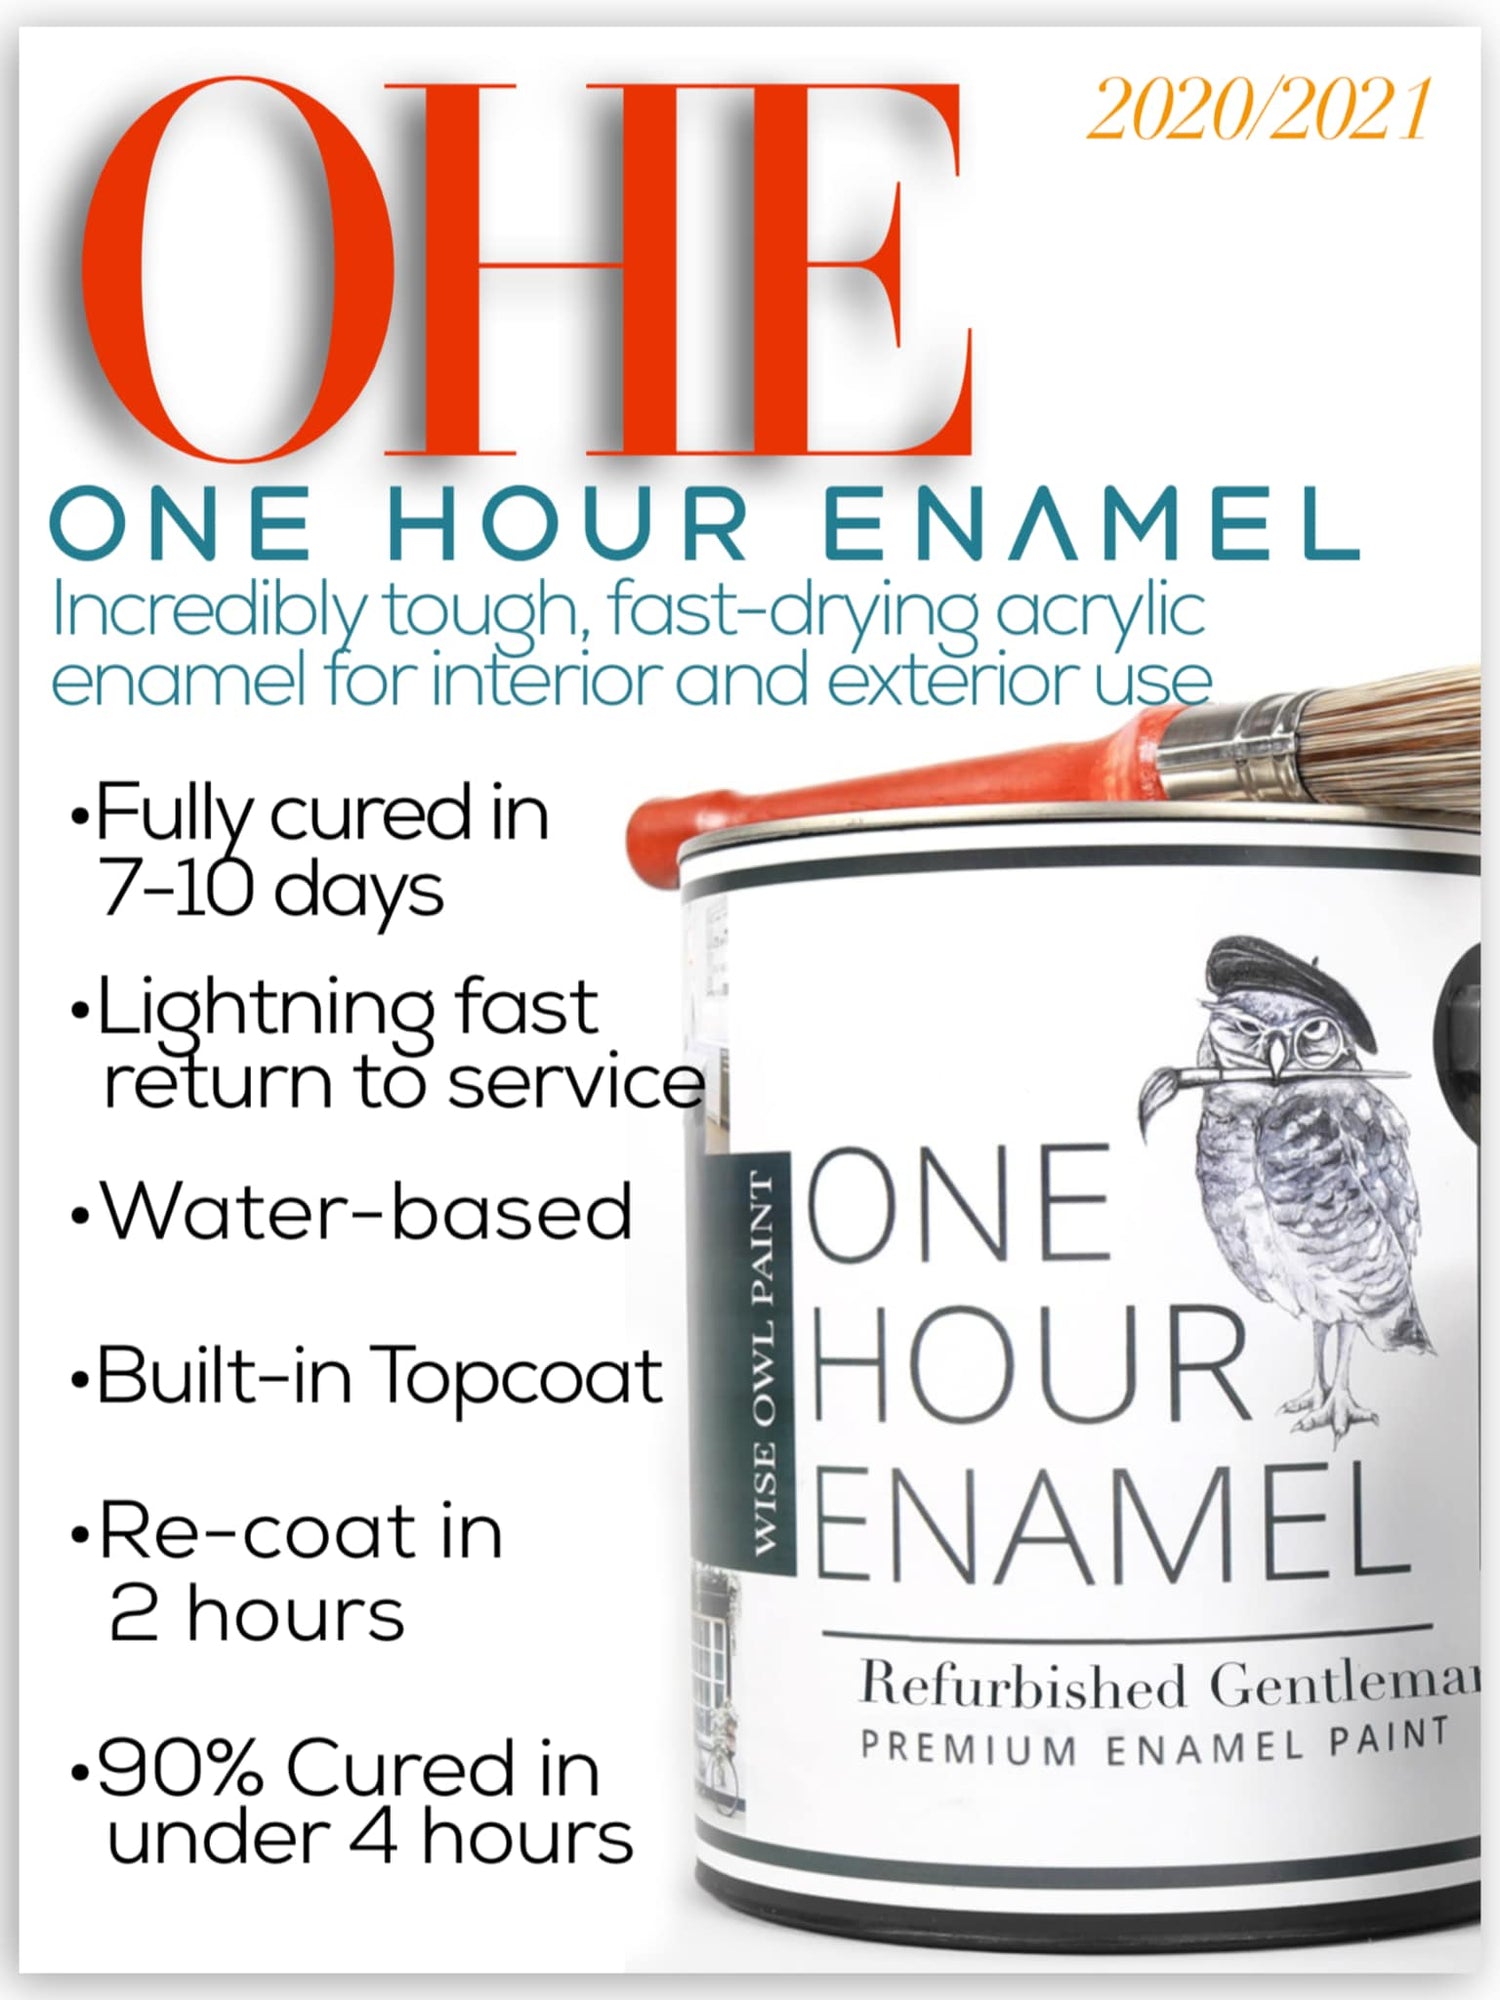 Wise Owl One Hour Enamel Paint 32 oz Quart - Free Same Day Shipping - Paint for Furniture and Cabinets - belleandbeau850